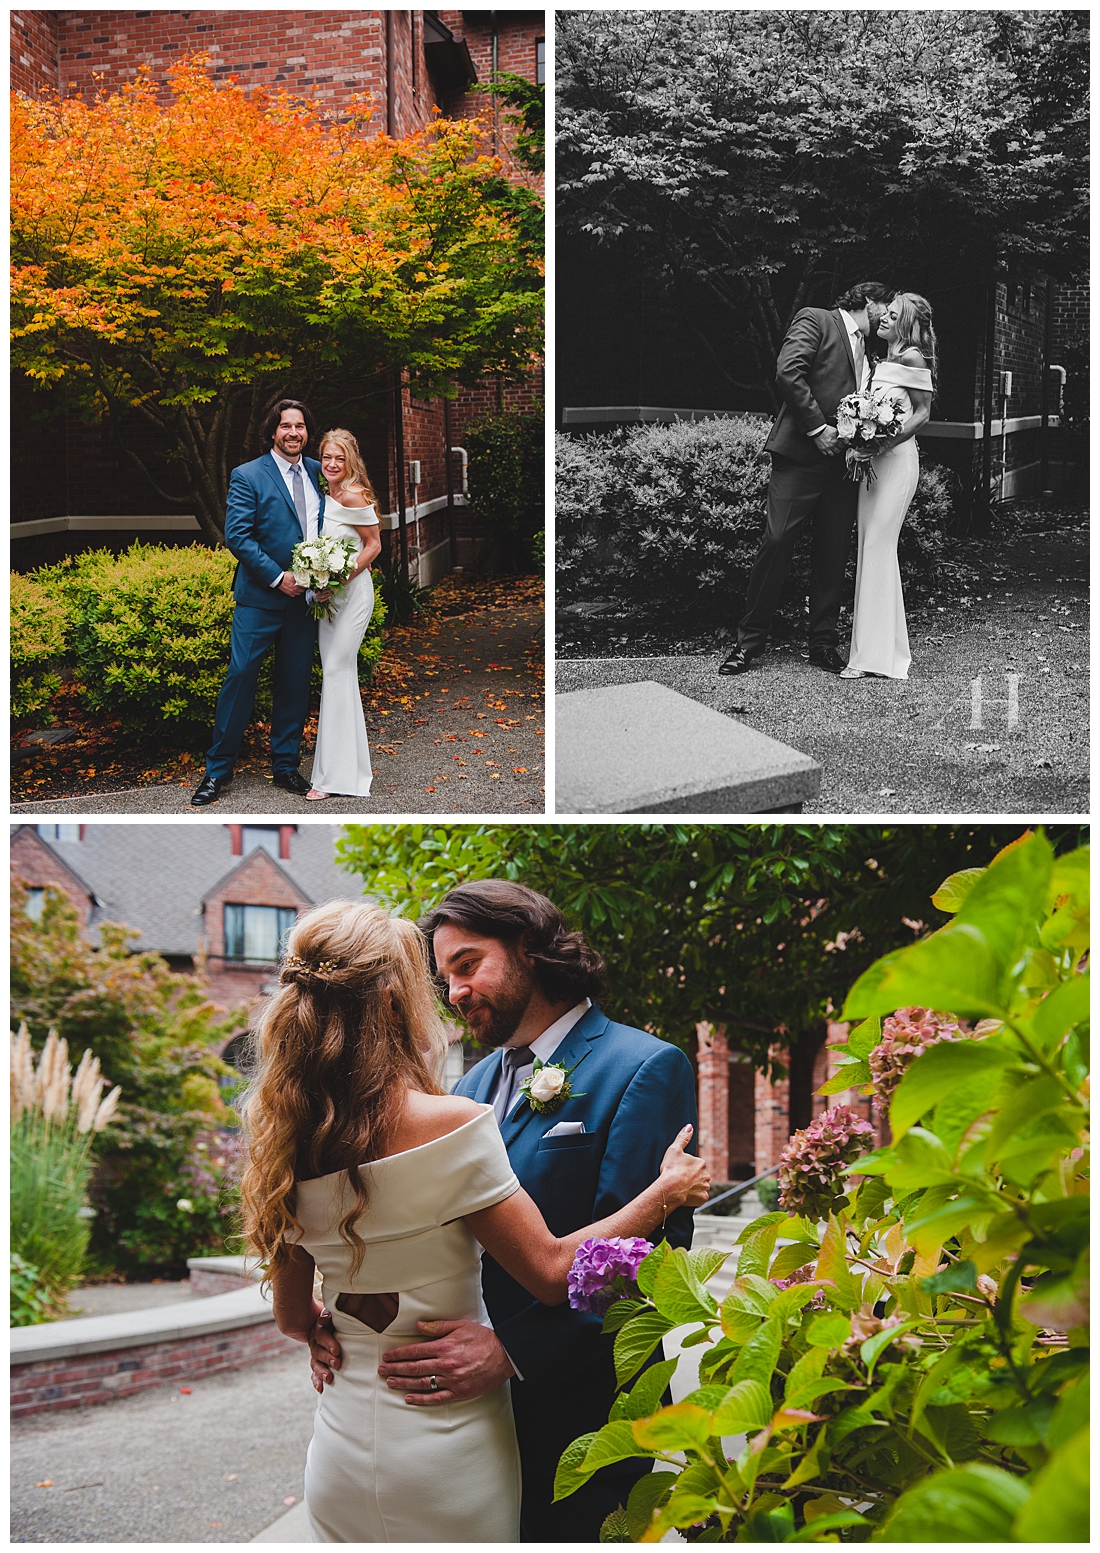 Sweet, Intimate Moments with Bride and Groom on Wedding Day | Fall Summer Wedding Ideas, Washington Wedding Locations | Photographed by the Best Tacoma Wedding Photographer Amanda Howse Photography